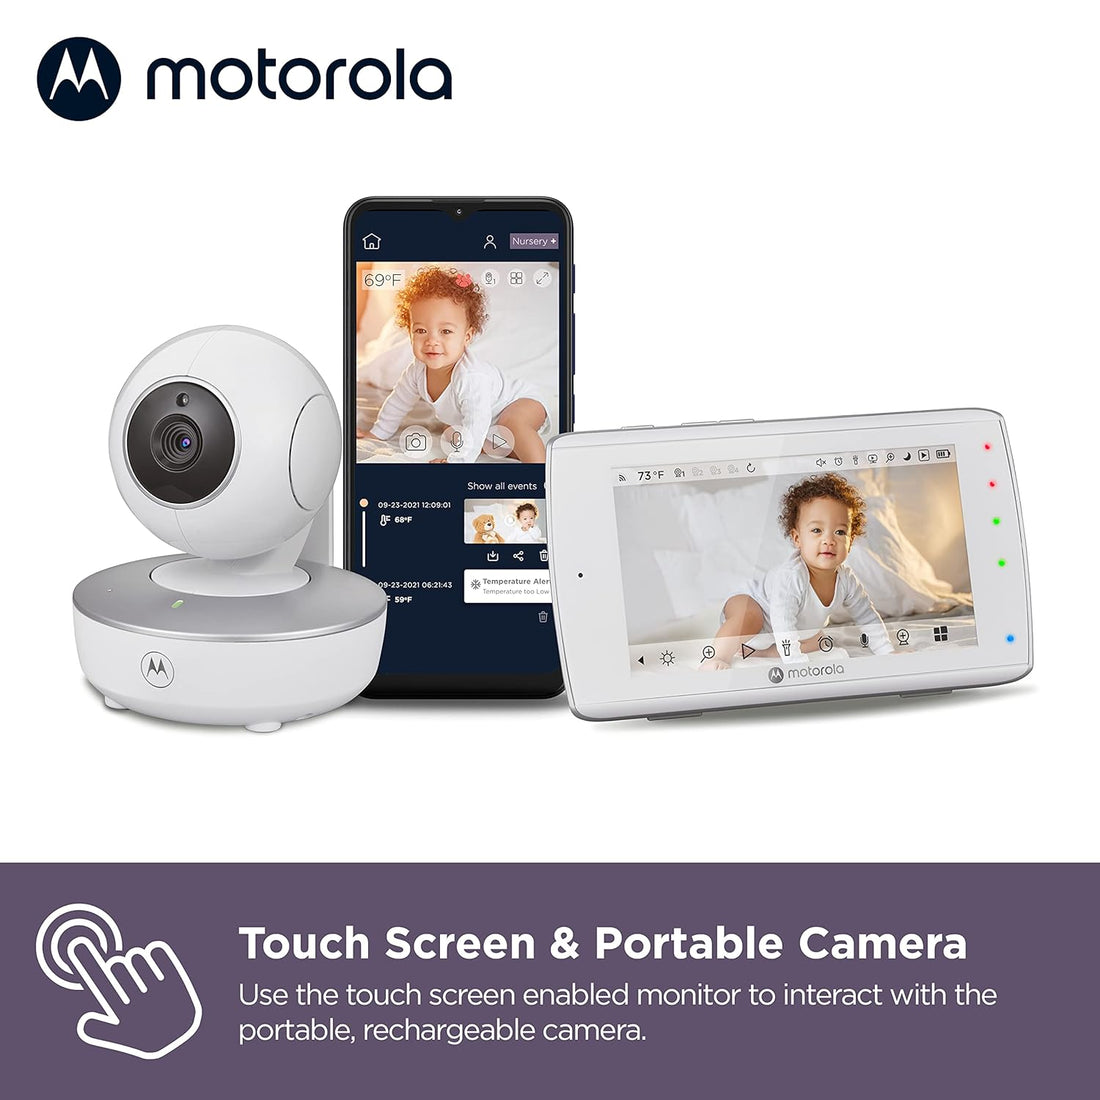 Motorola Baby Monitor VM36XL Touchscreen 5" Portable WiFi Video Baby Monitor with Camera HD 720p - Connects to Smart Phone App, 1000ft Range, Two-Way Audio, Remote Pan-Tilt-Zoom, Room Temp, Lullabies